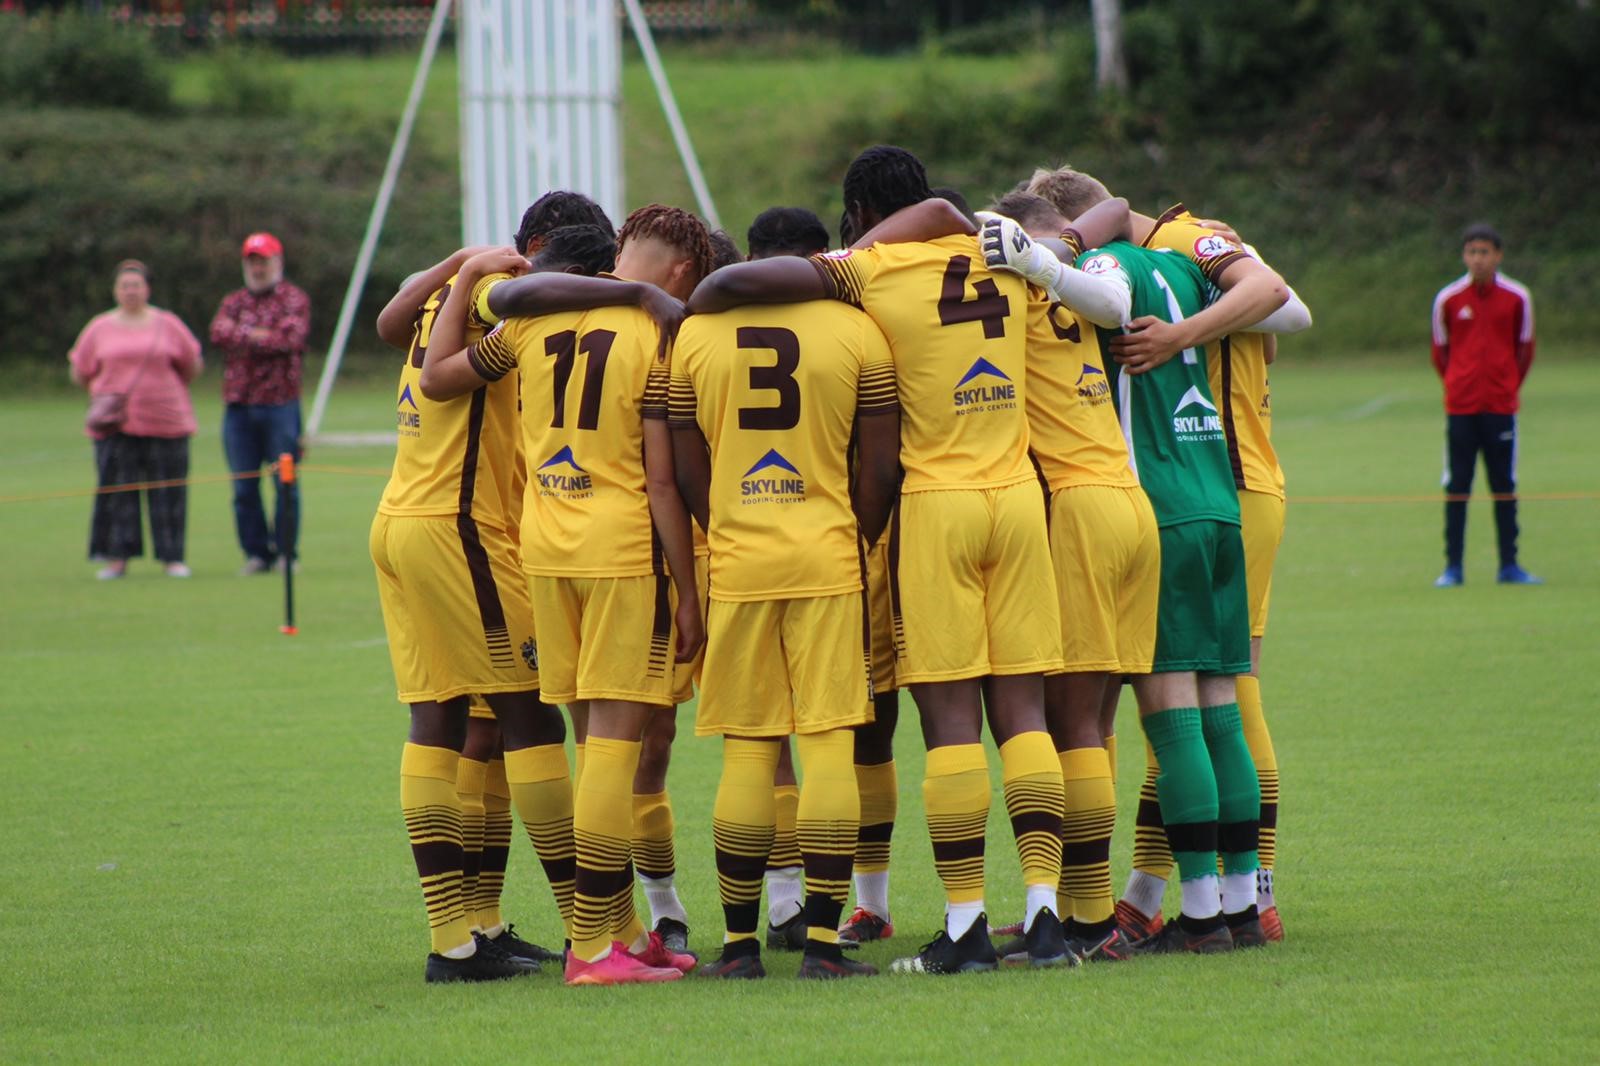 Football players in yellow shirts in a huddle